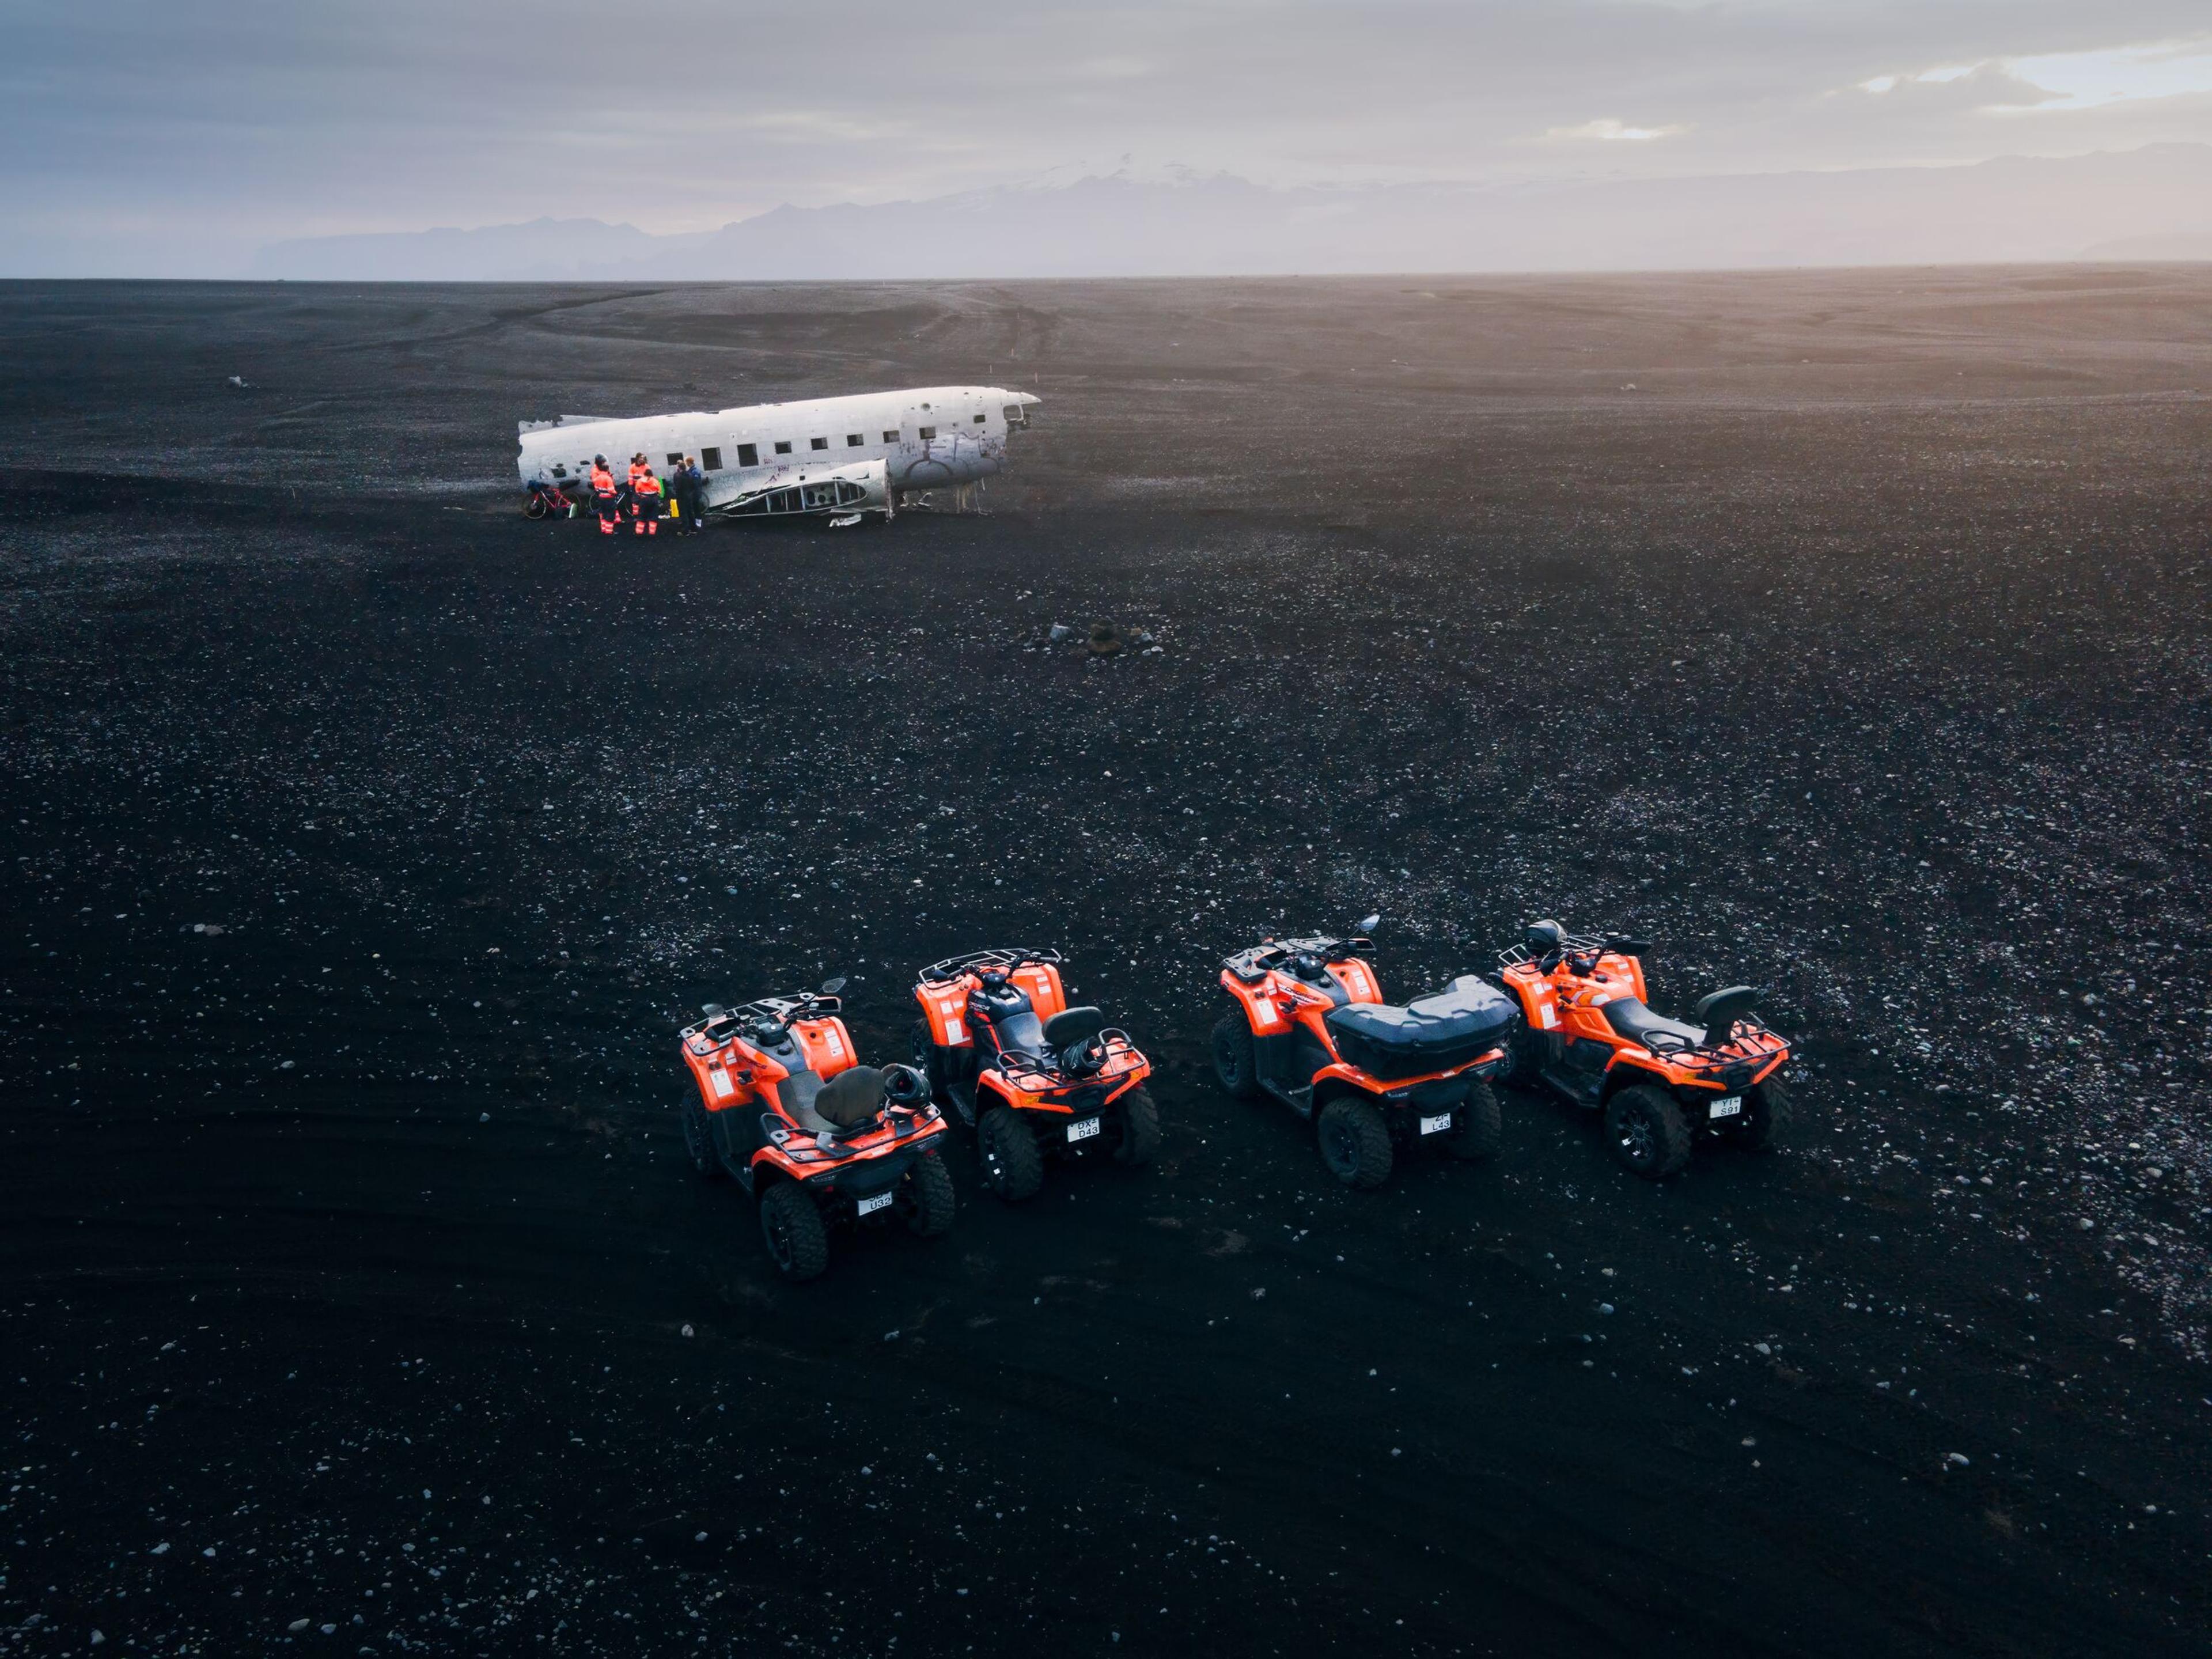 Adventurers gather around a historic plane wreck on Iceland's vast black sand expanse, with ATVs poised for the next thrill.